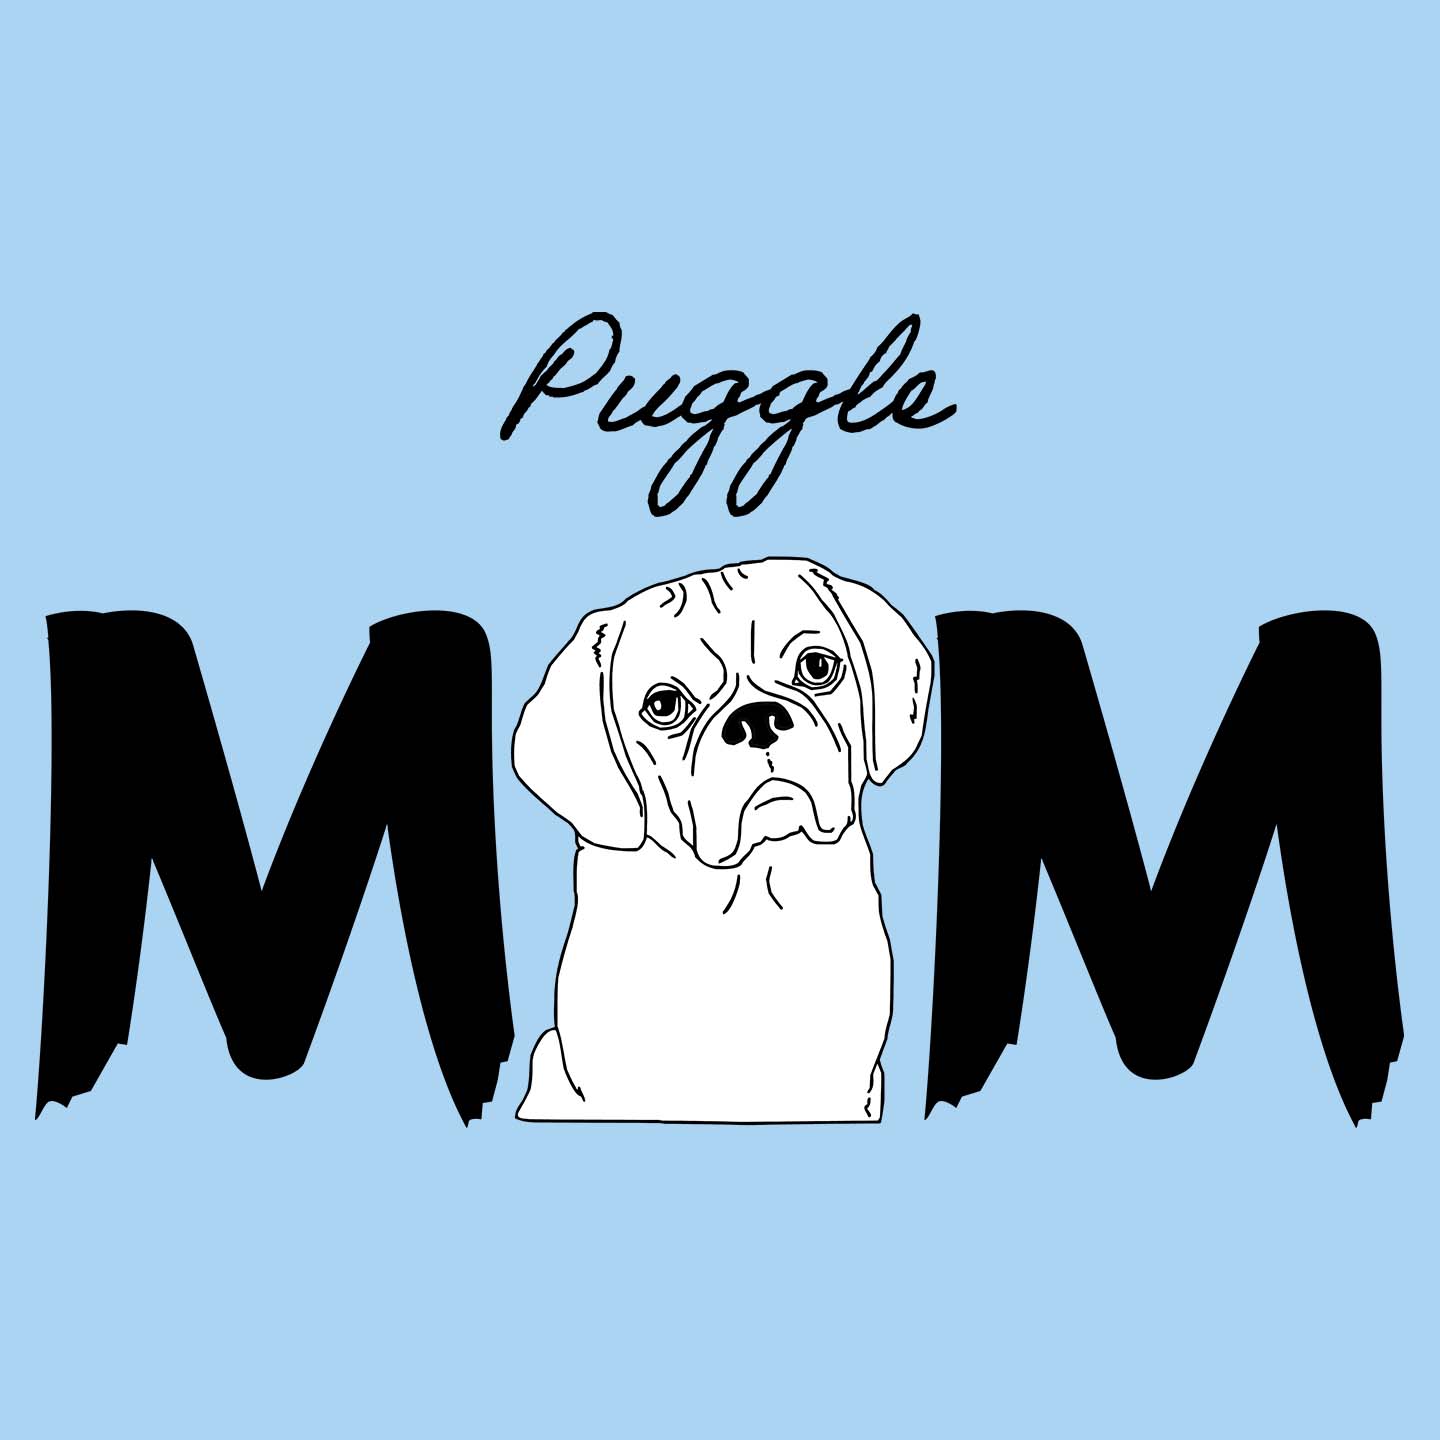 Puggle Breed Mom - Women's Fitted T-Shirt